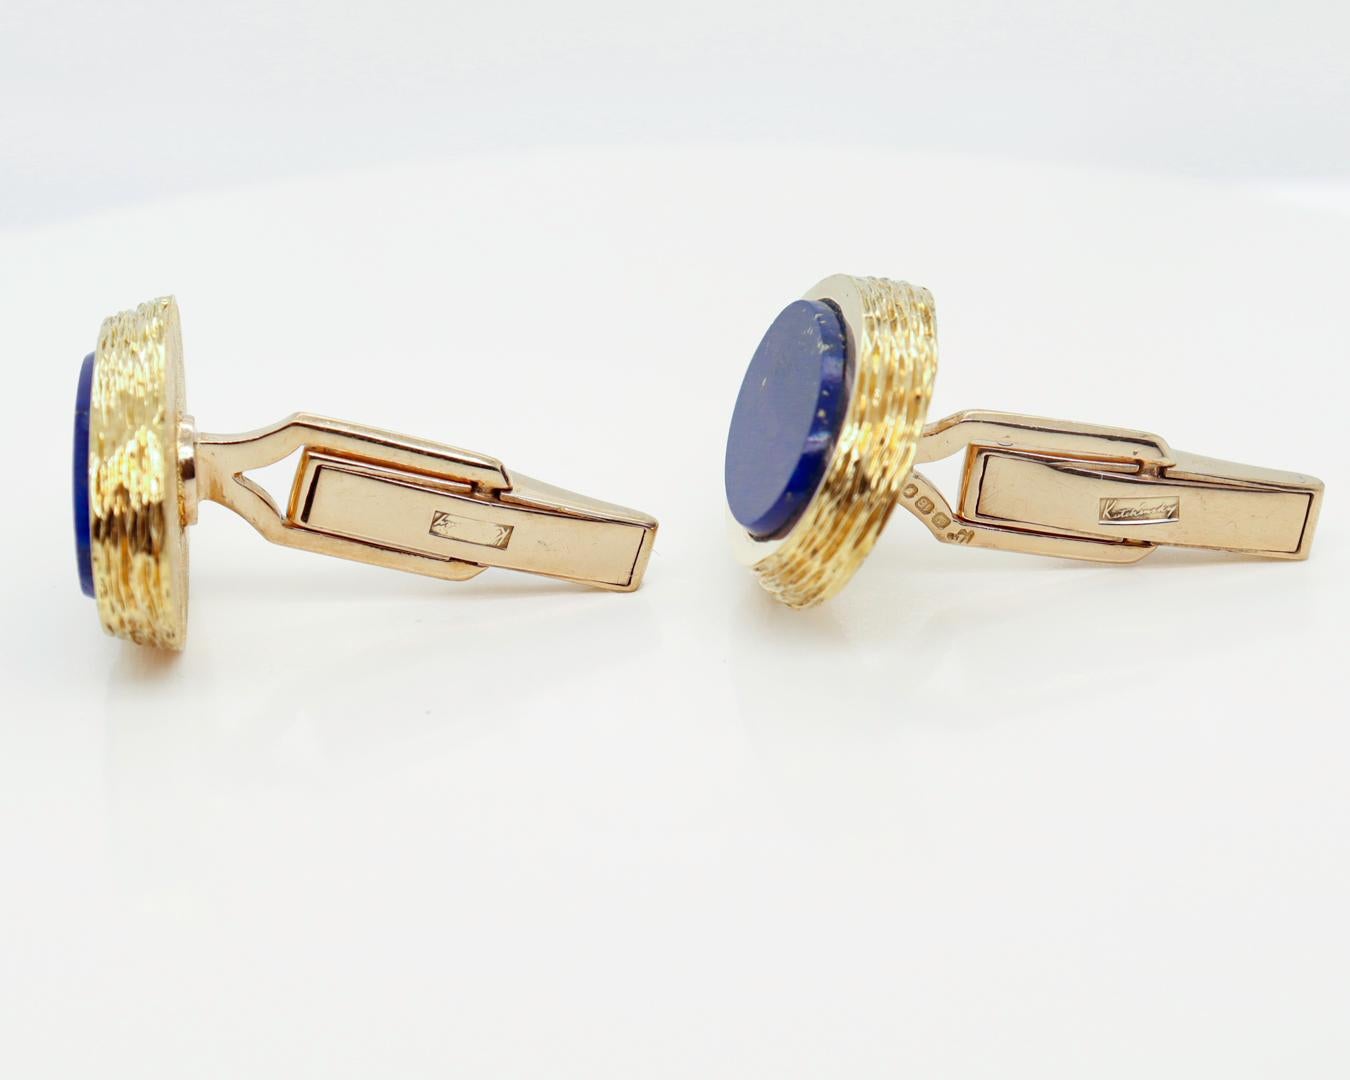 Pair of English Mid-Century Modern 18k Gold & Lapis Cufflinks by Kutchinsky For Sale 3